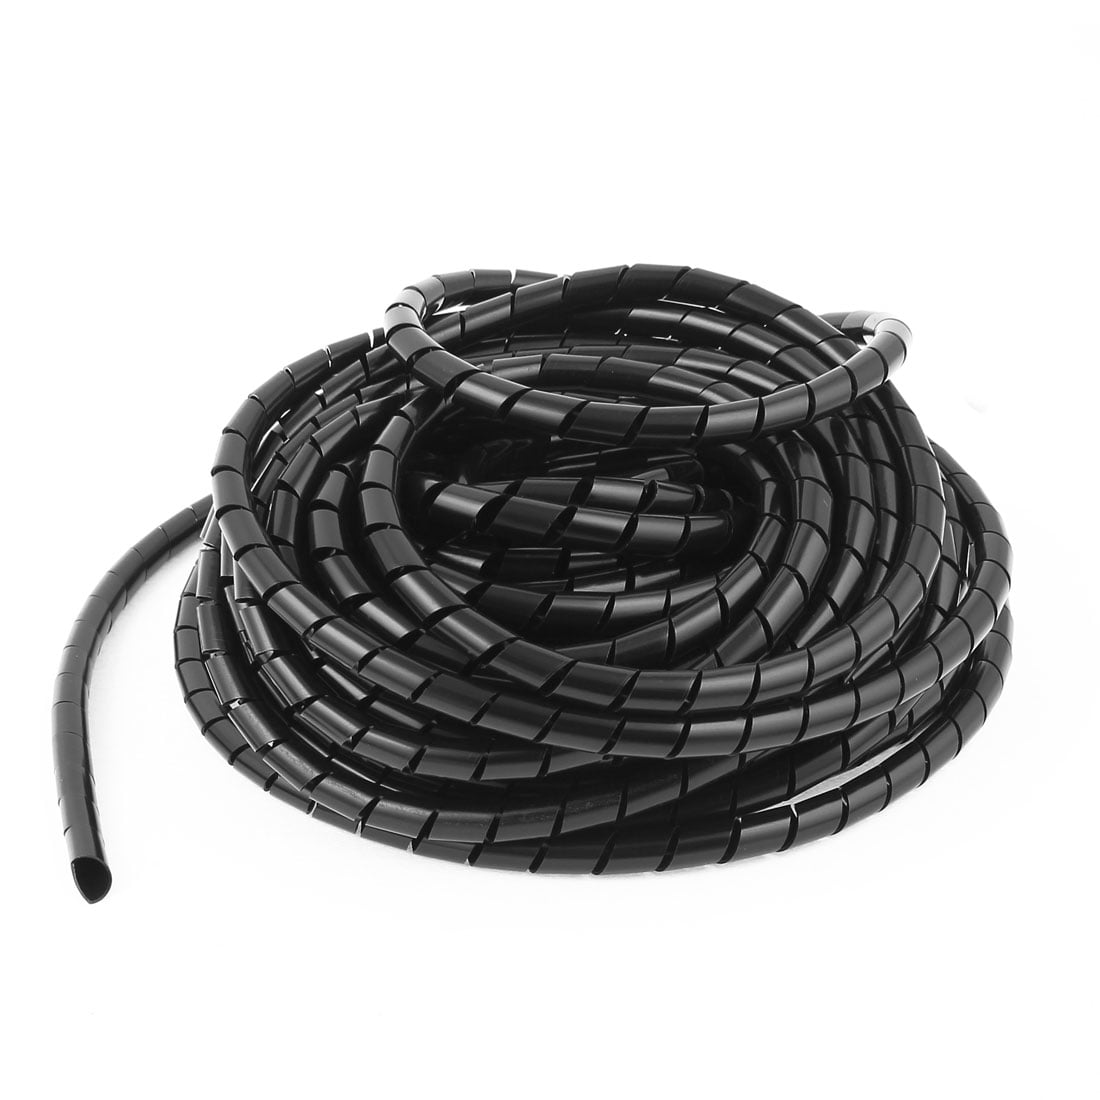 10M 8mm Spiral Hose Cable Wire Wrap Tube Part PE Manage Cord Polyethylene Black 